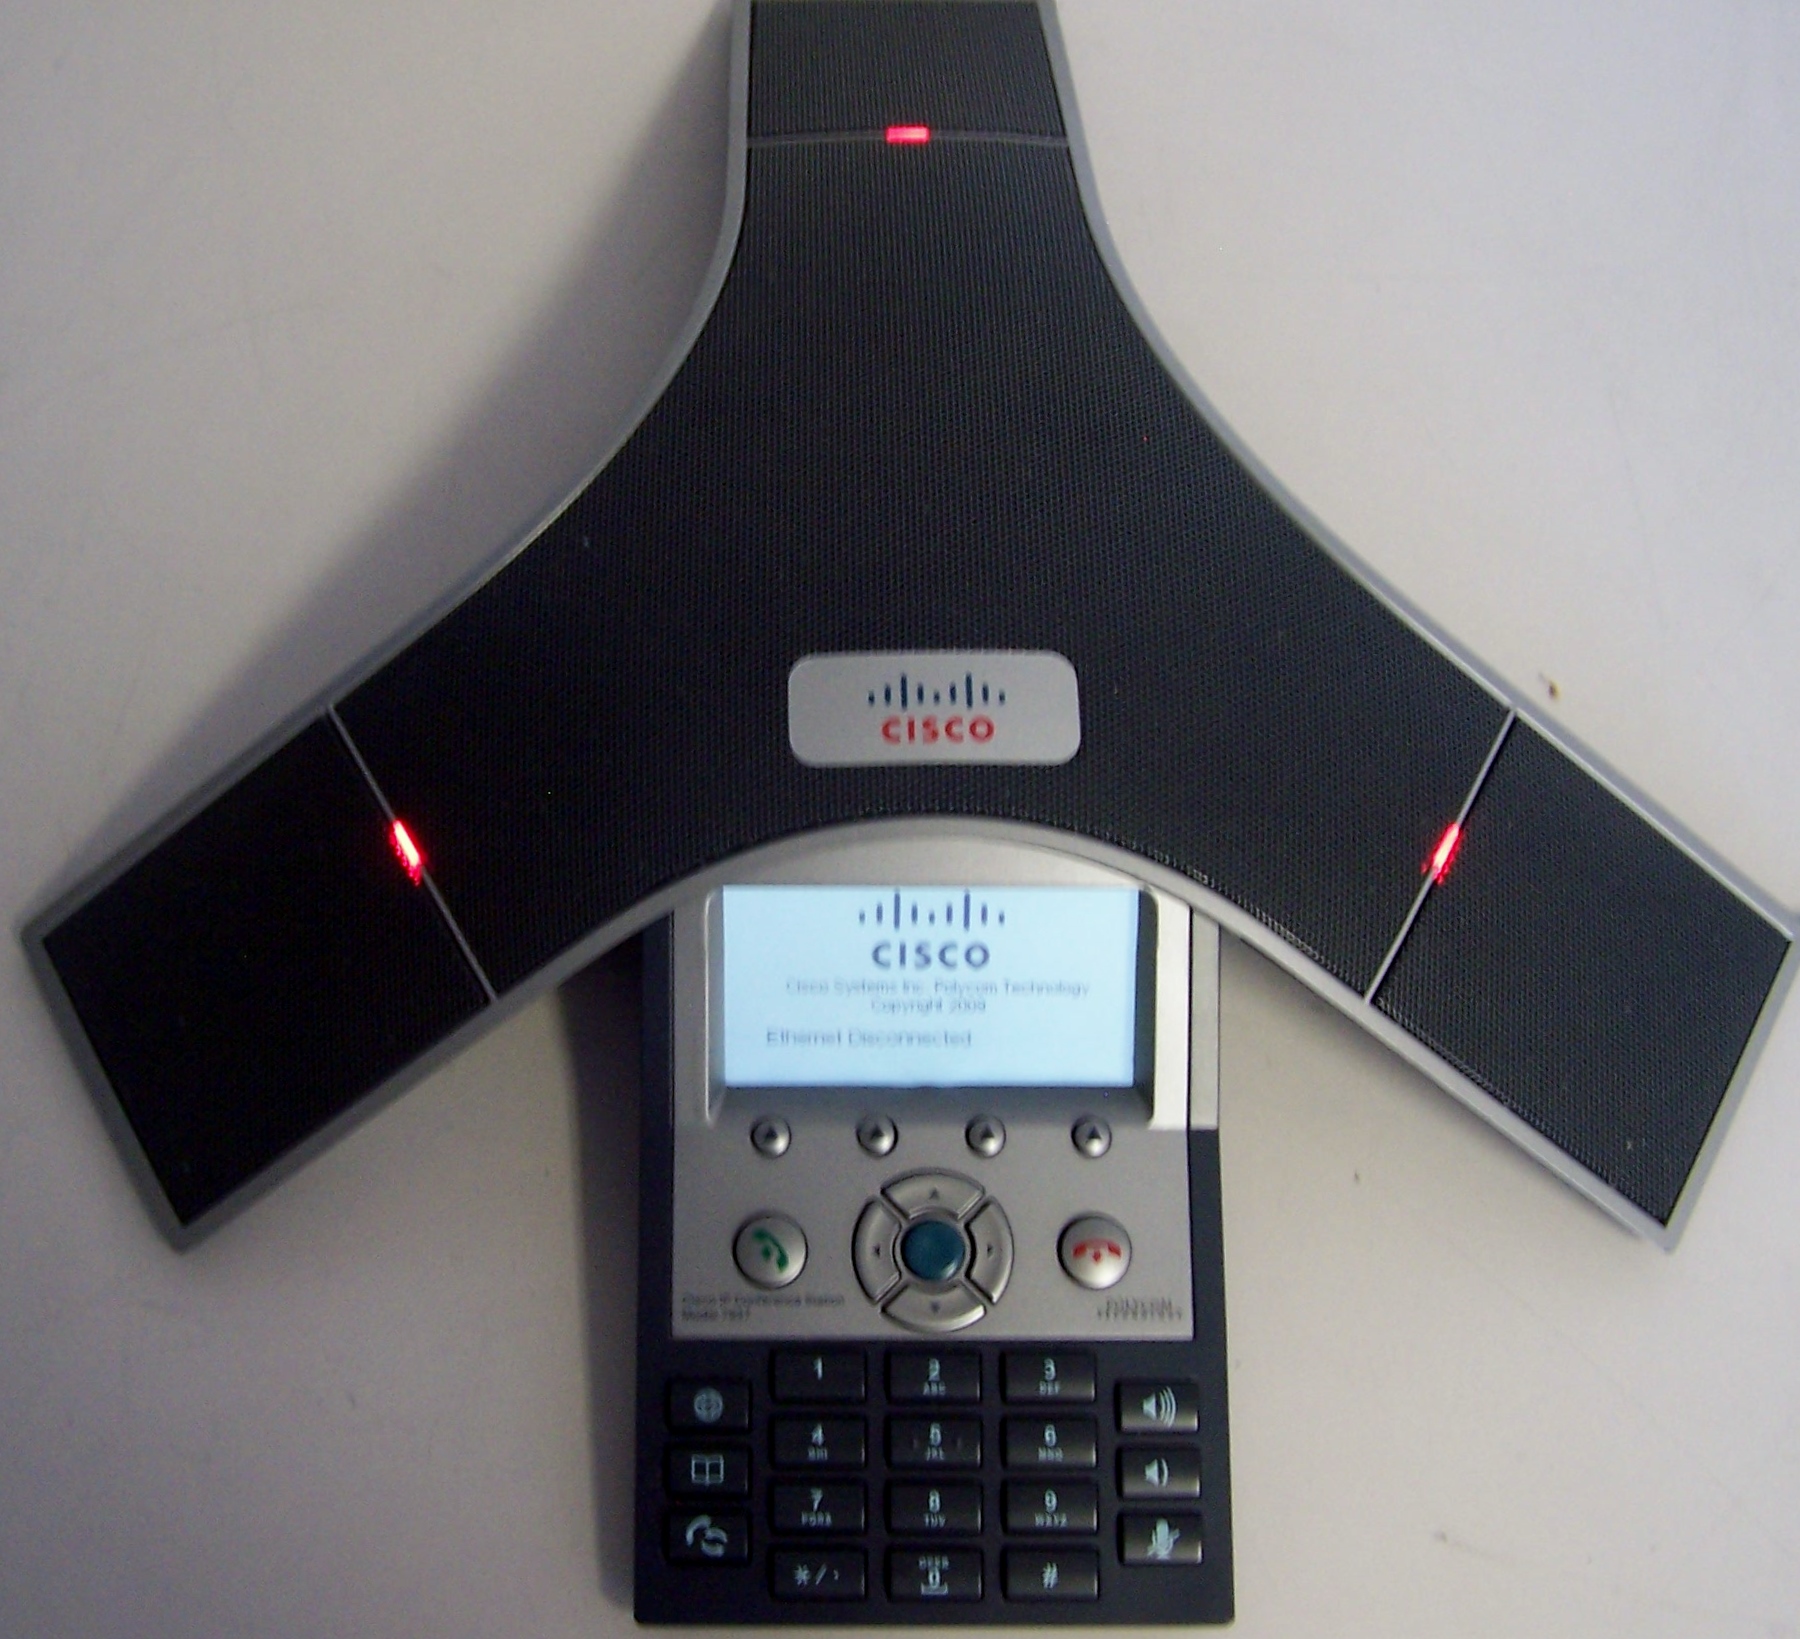 Cisco Polycom 7937 VoIP IP Conference Station Phone for sale online 